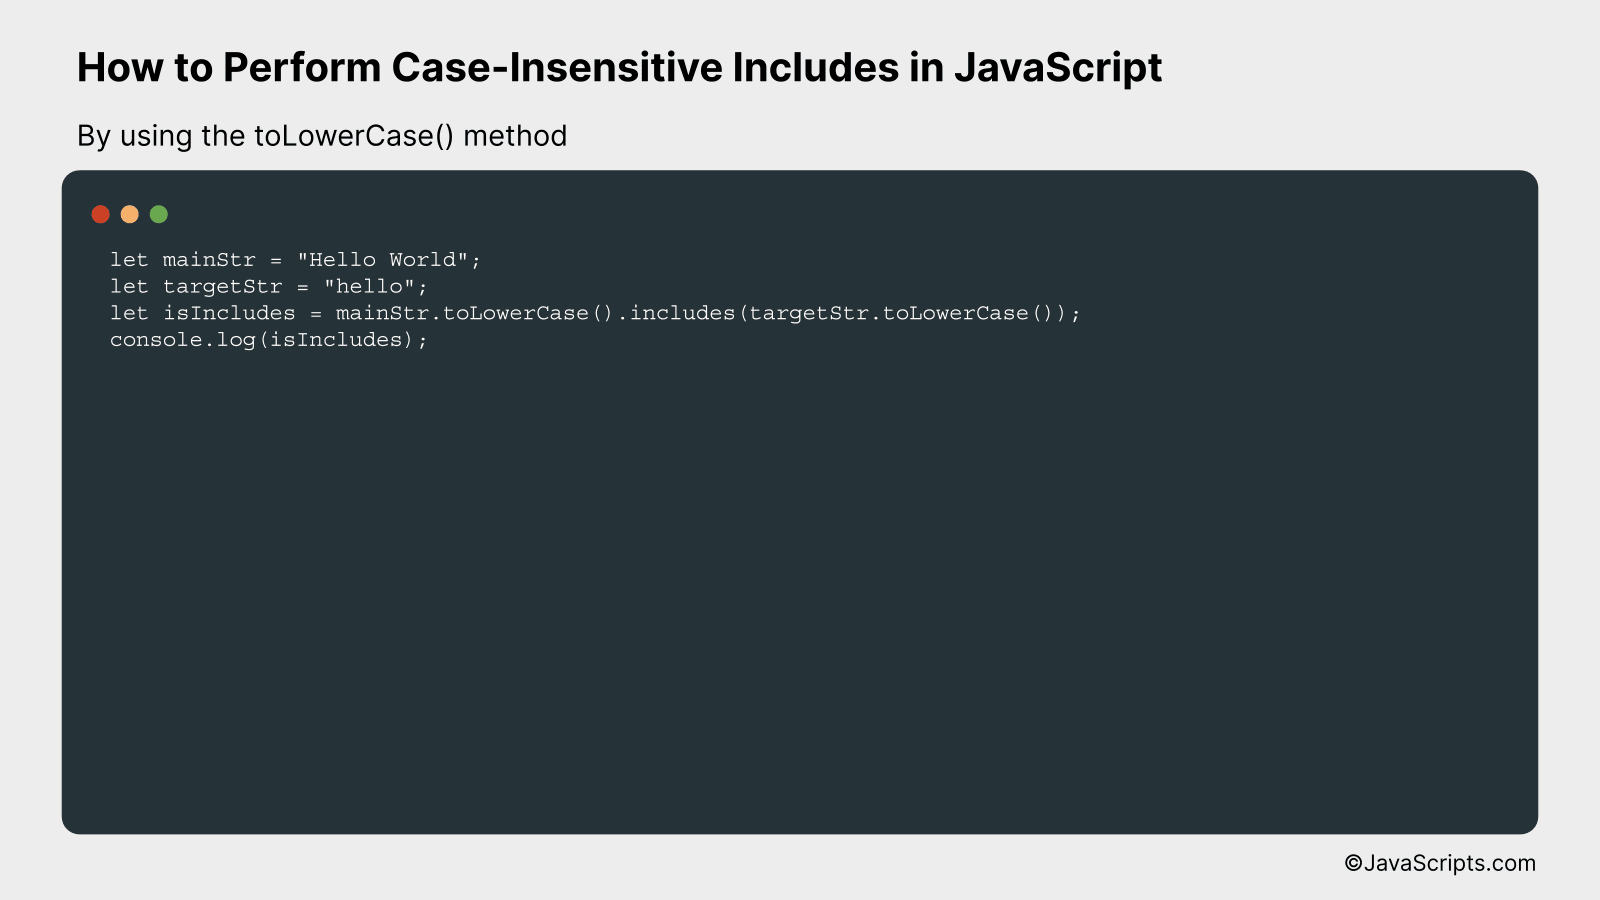 By using the toLowerCase() method